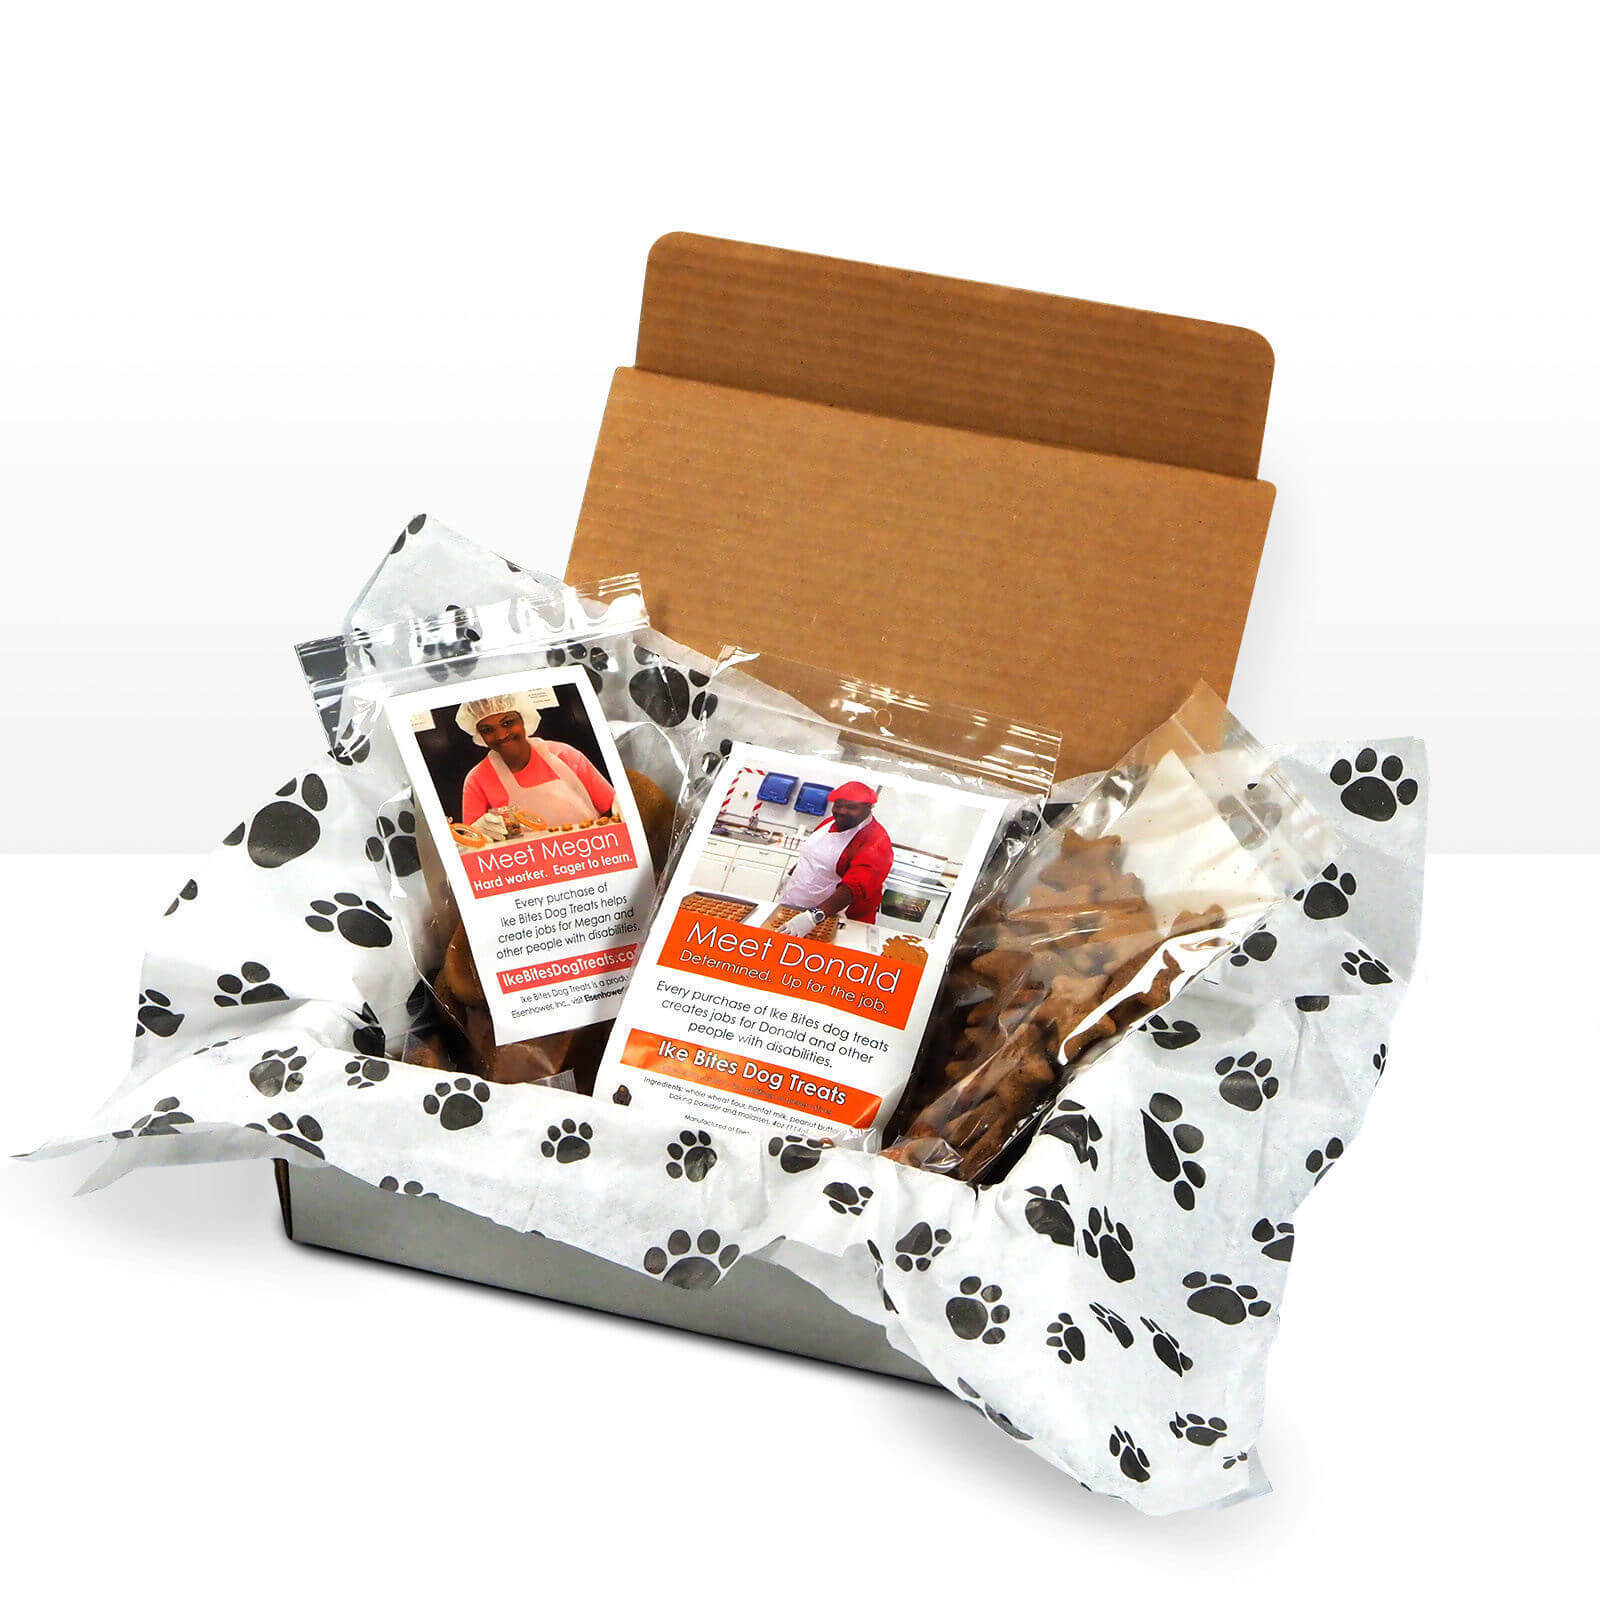 Dog Treat Packaging photographed for Ike's Bites, a Non-profit in Wisconsin